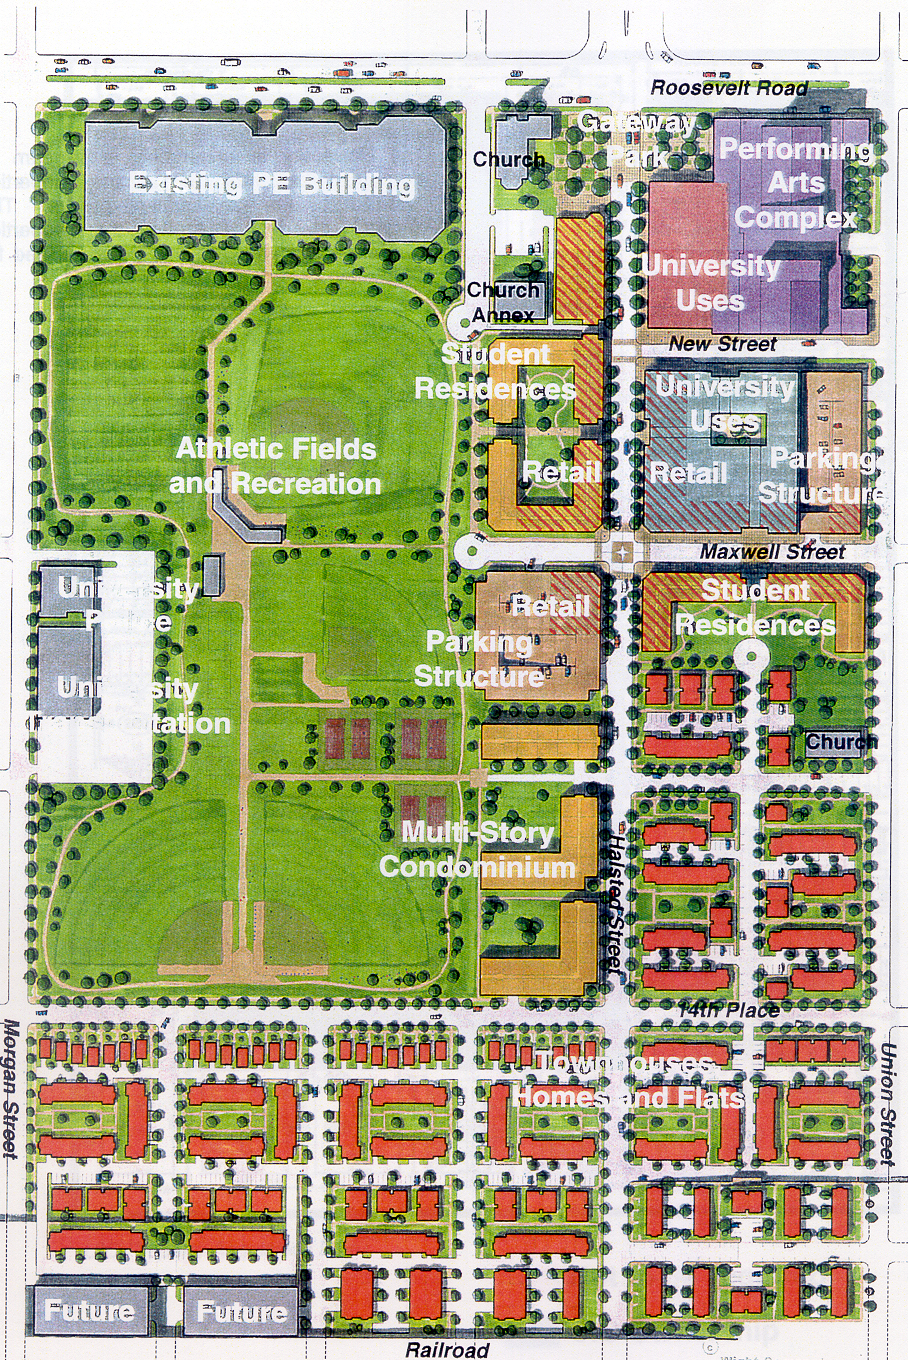 Advertising Plan for the University of Illinois